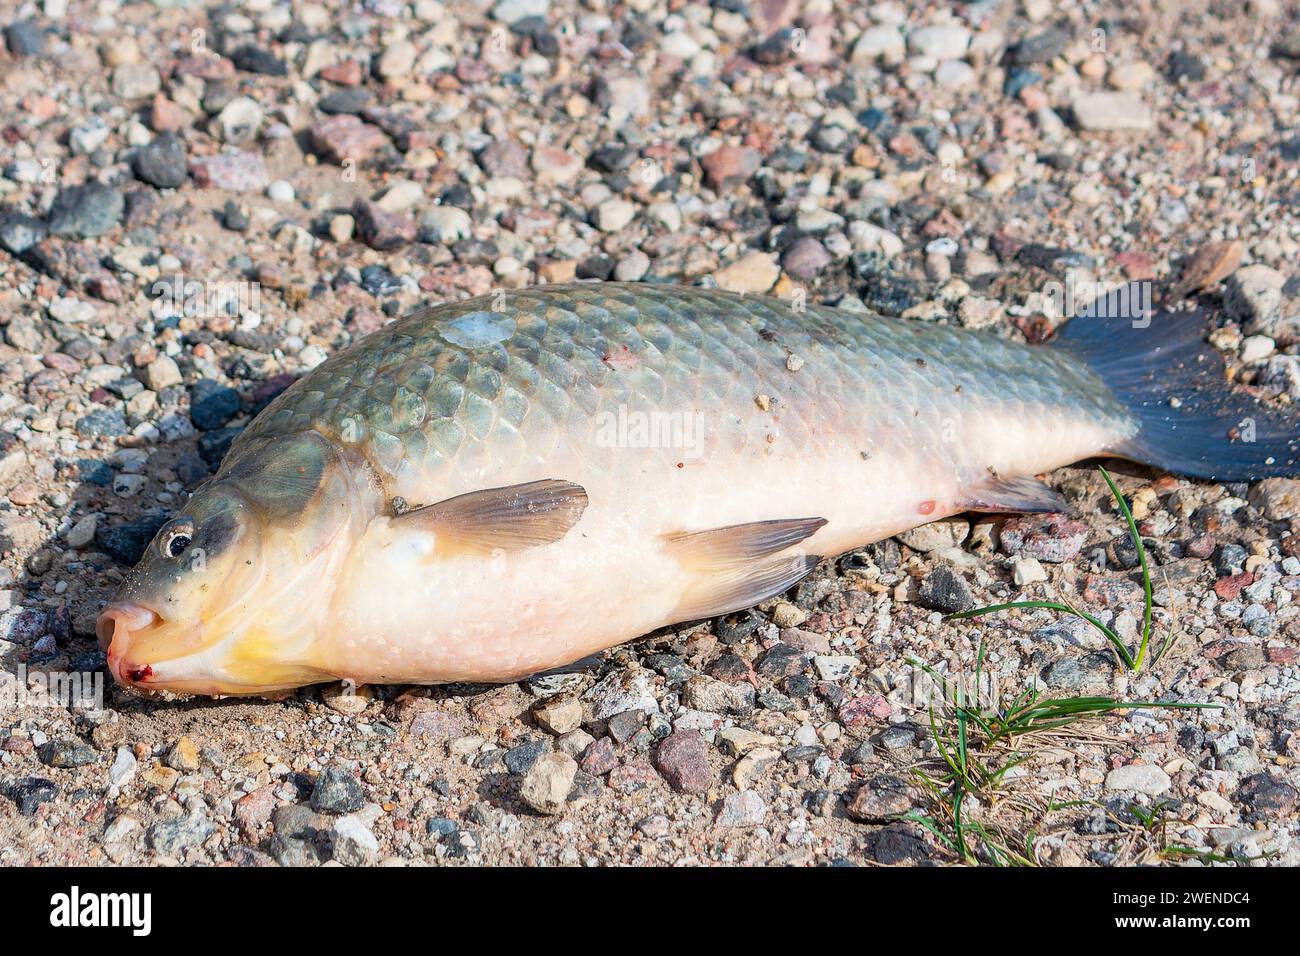 Fish in the sand. Carp. Close-up Stock Photo